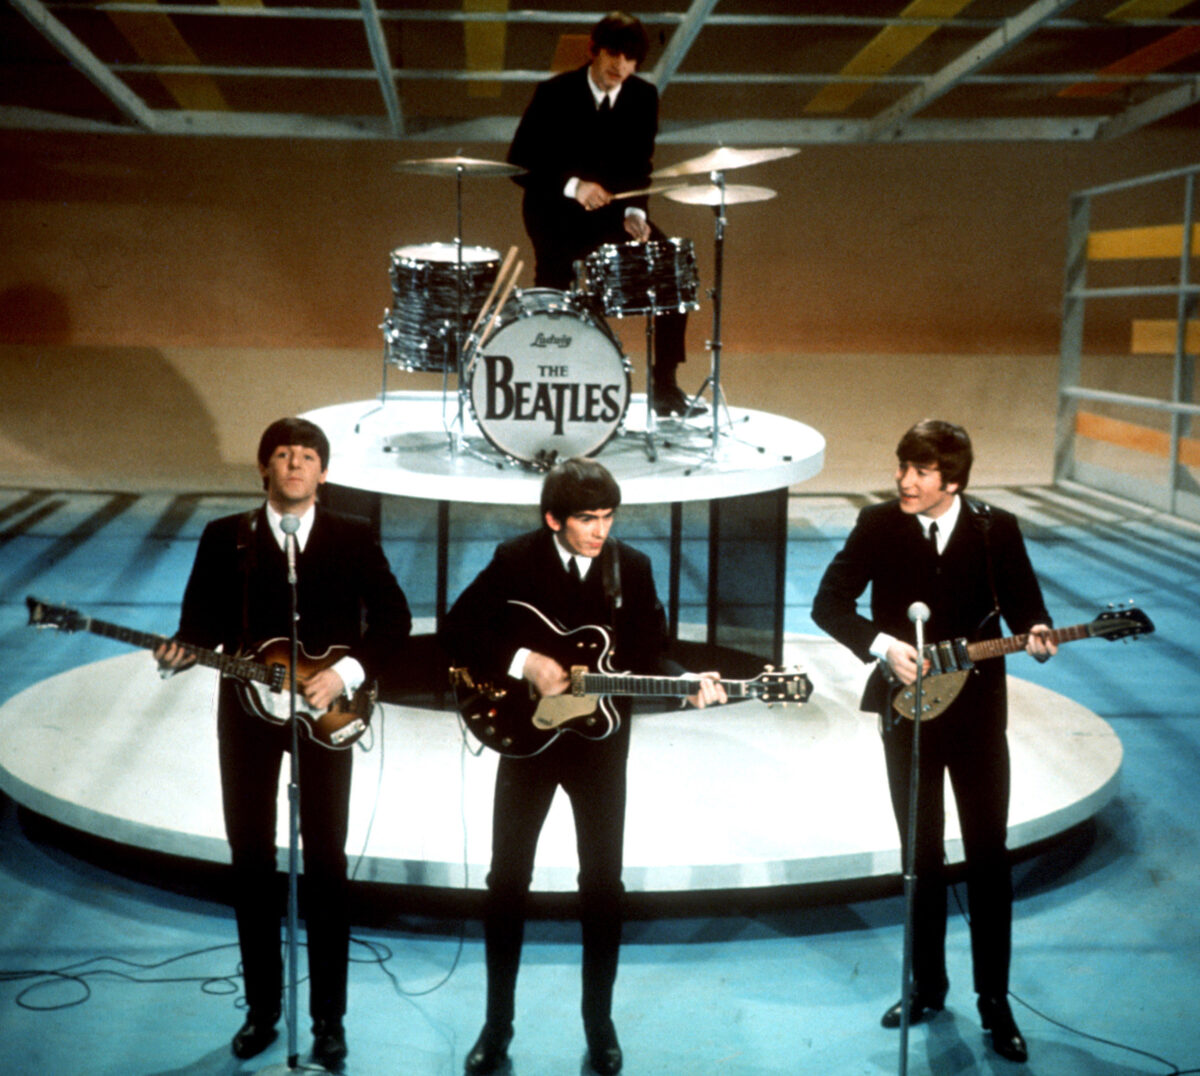 Beatles fans noticed a Now and Then Easter egg in the song that brings everything full circle